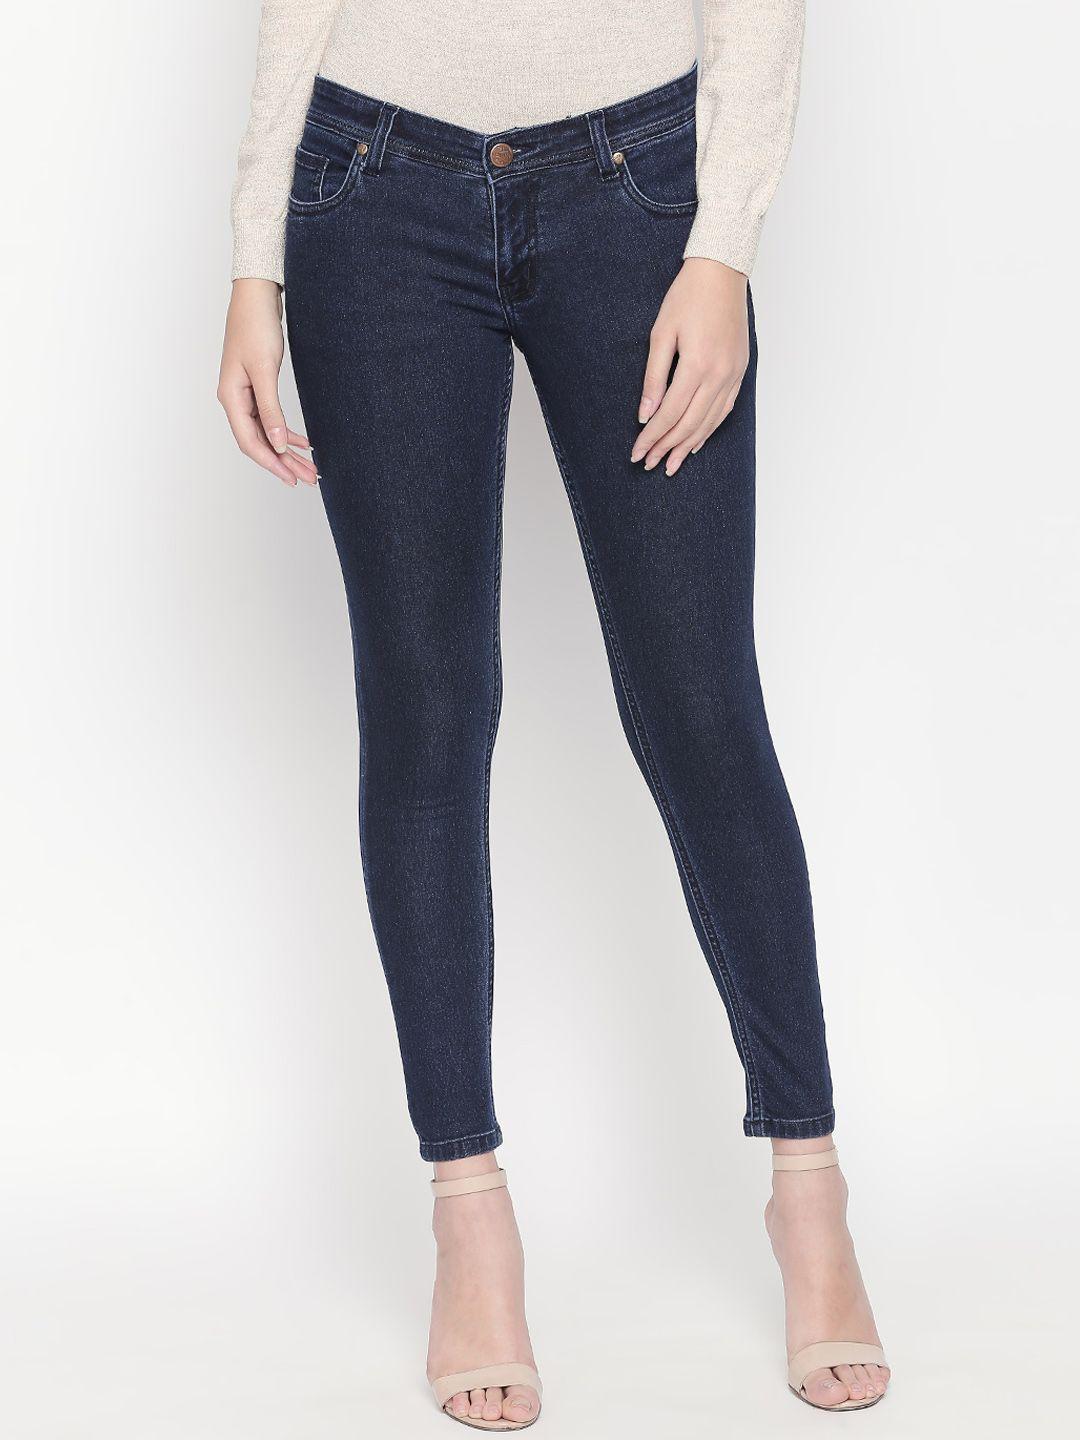 high-star-women-navy-blue-slim-fit-mid-rise-clean-look-stretchable-jeans